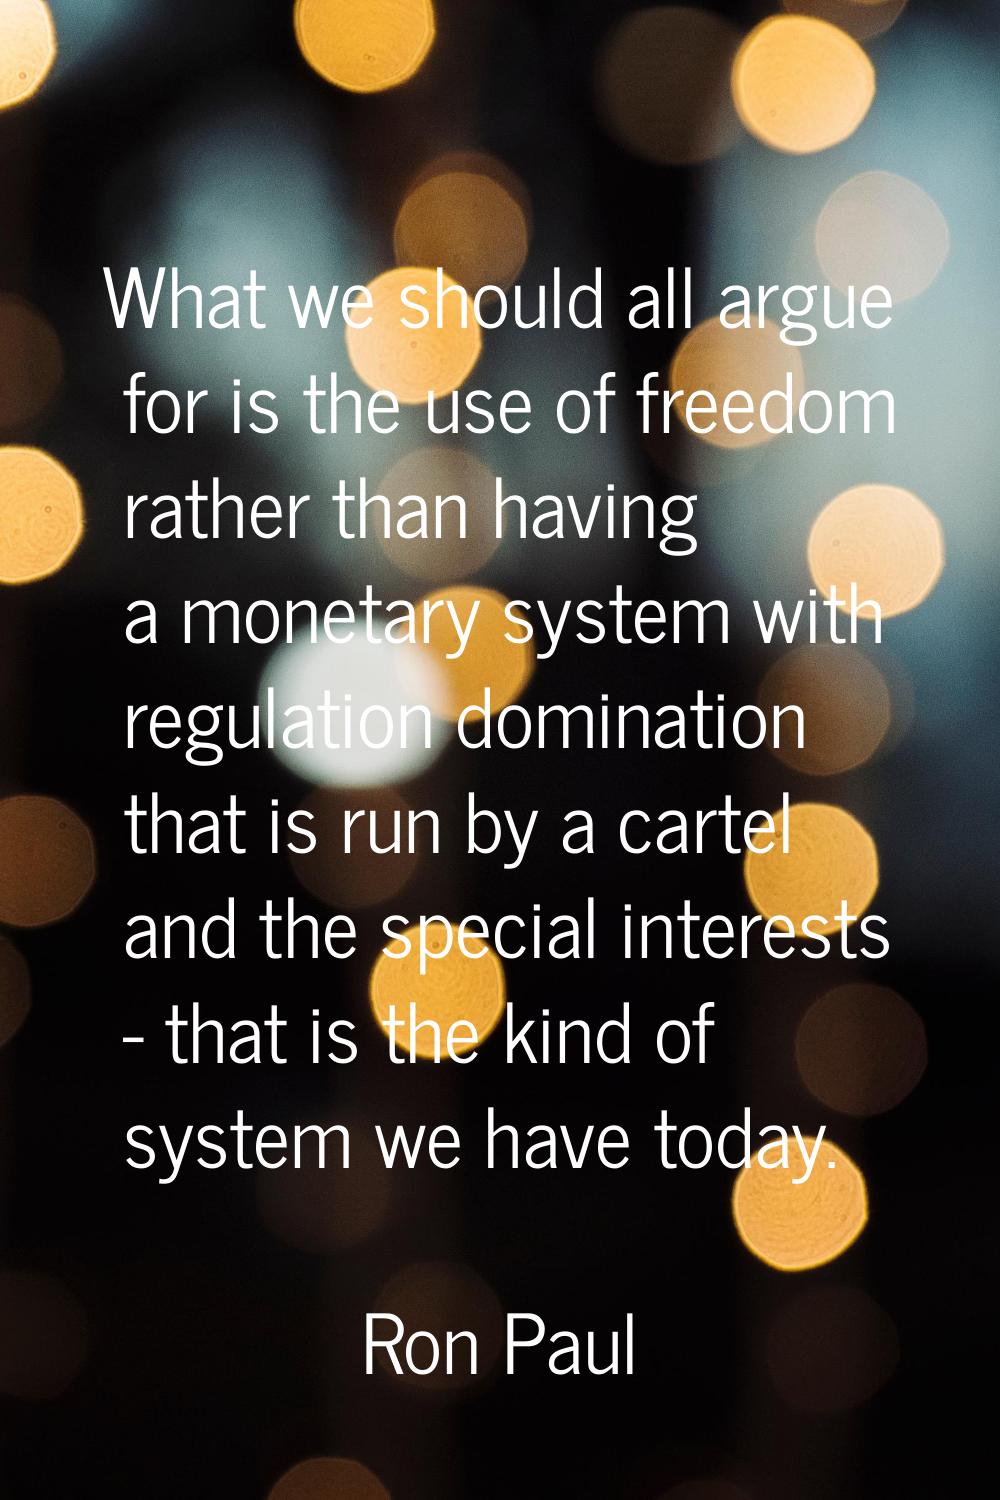 What we should all argue for is the use of freedom rather than having a monetary system with regula